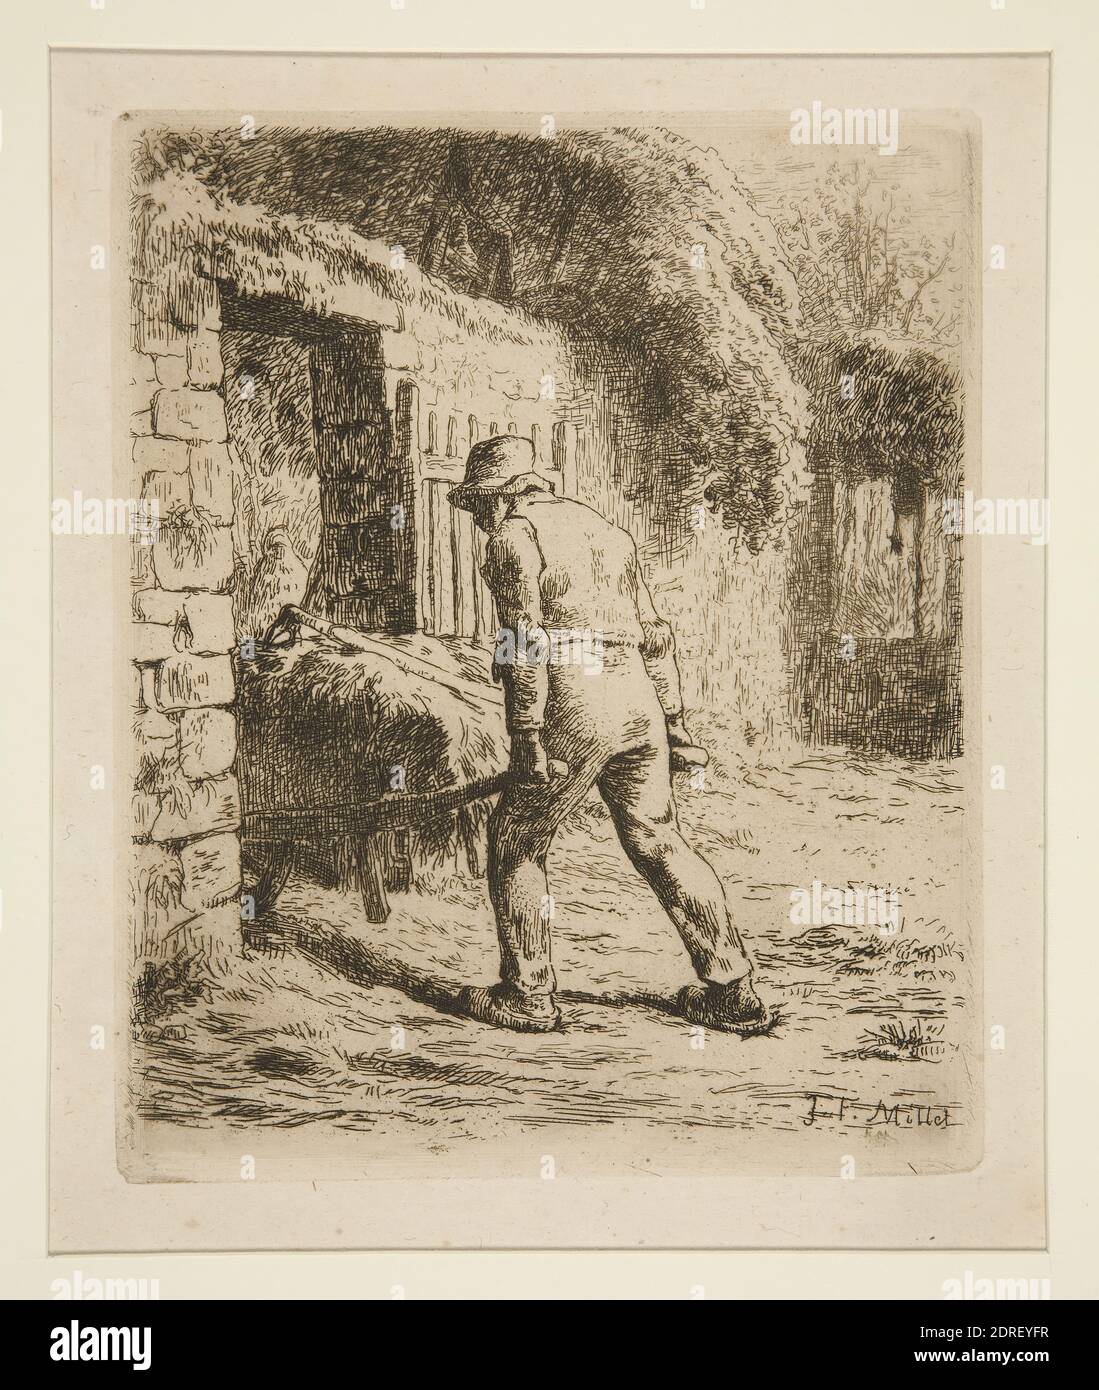 Artist: Jean-François Millet, French, 1814–1875, Le Paysan rentrant du fumier (Peasant with a Wheelbarrow), Etching, platemark: 16.5 × 13.3 cm (6 1/2 × 5 1/4 in.), French, 19th century, Works on Paper - Prints Stock Photo